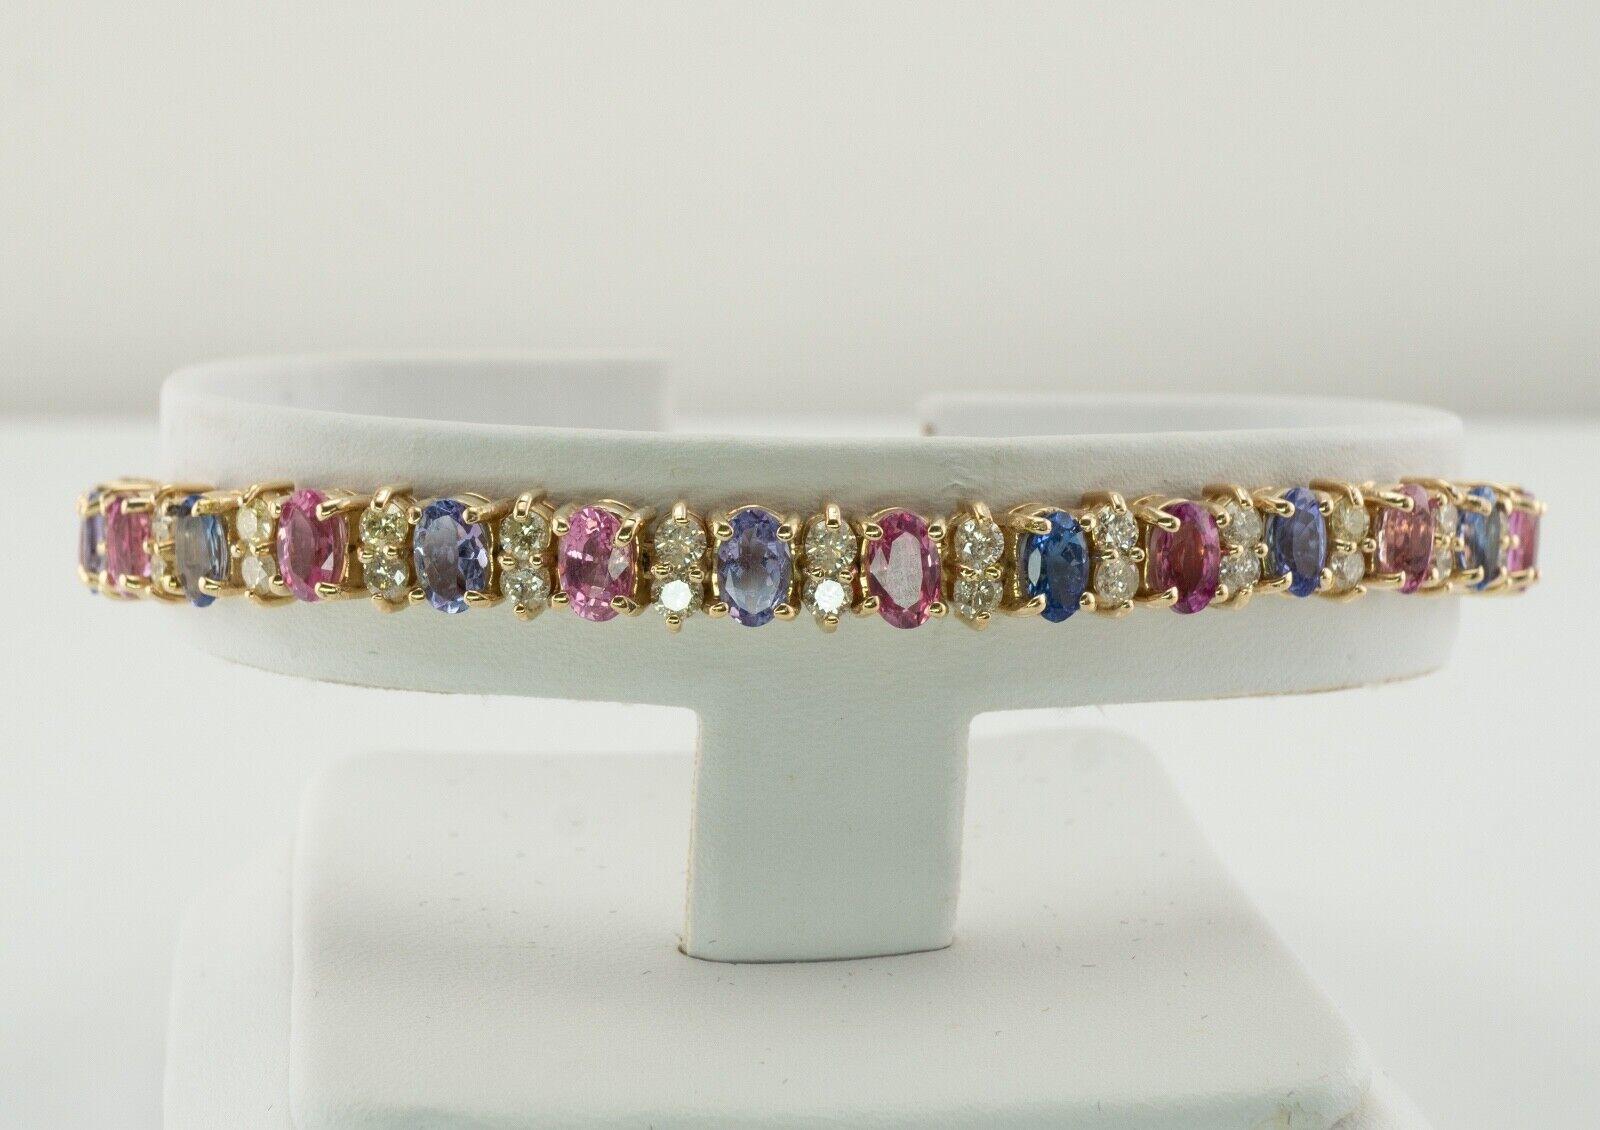 Natural Blue Pink Sapphire Diamond Bracelet 14K Gold 

This estate bracelet is crafted in solid 14K Yellow Gold (carefully tested and guaranteed). It is set with genuine Earth mined blue and pink sapphires and diamonds. Each sapphire measures 5mm x